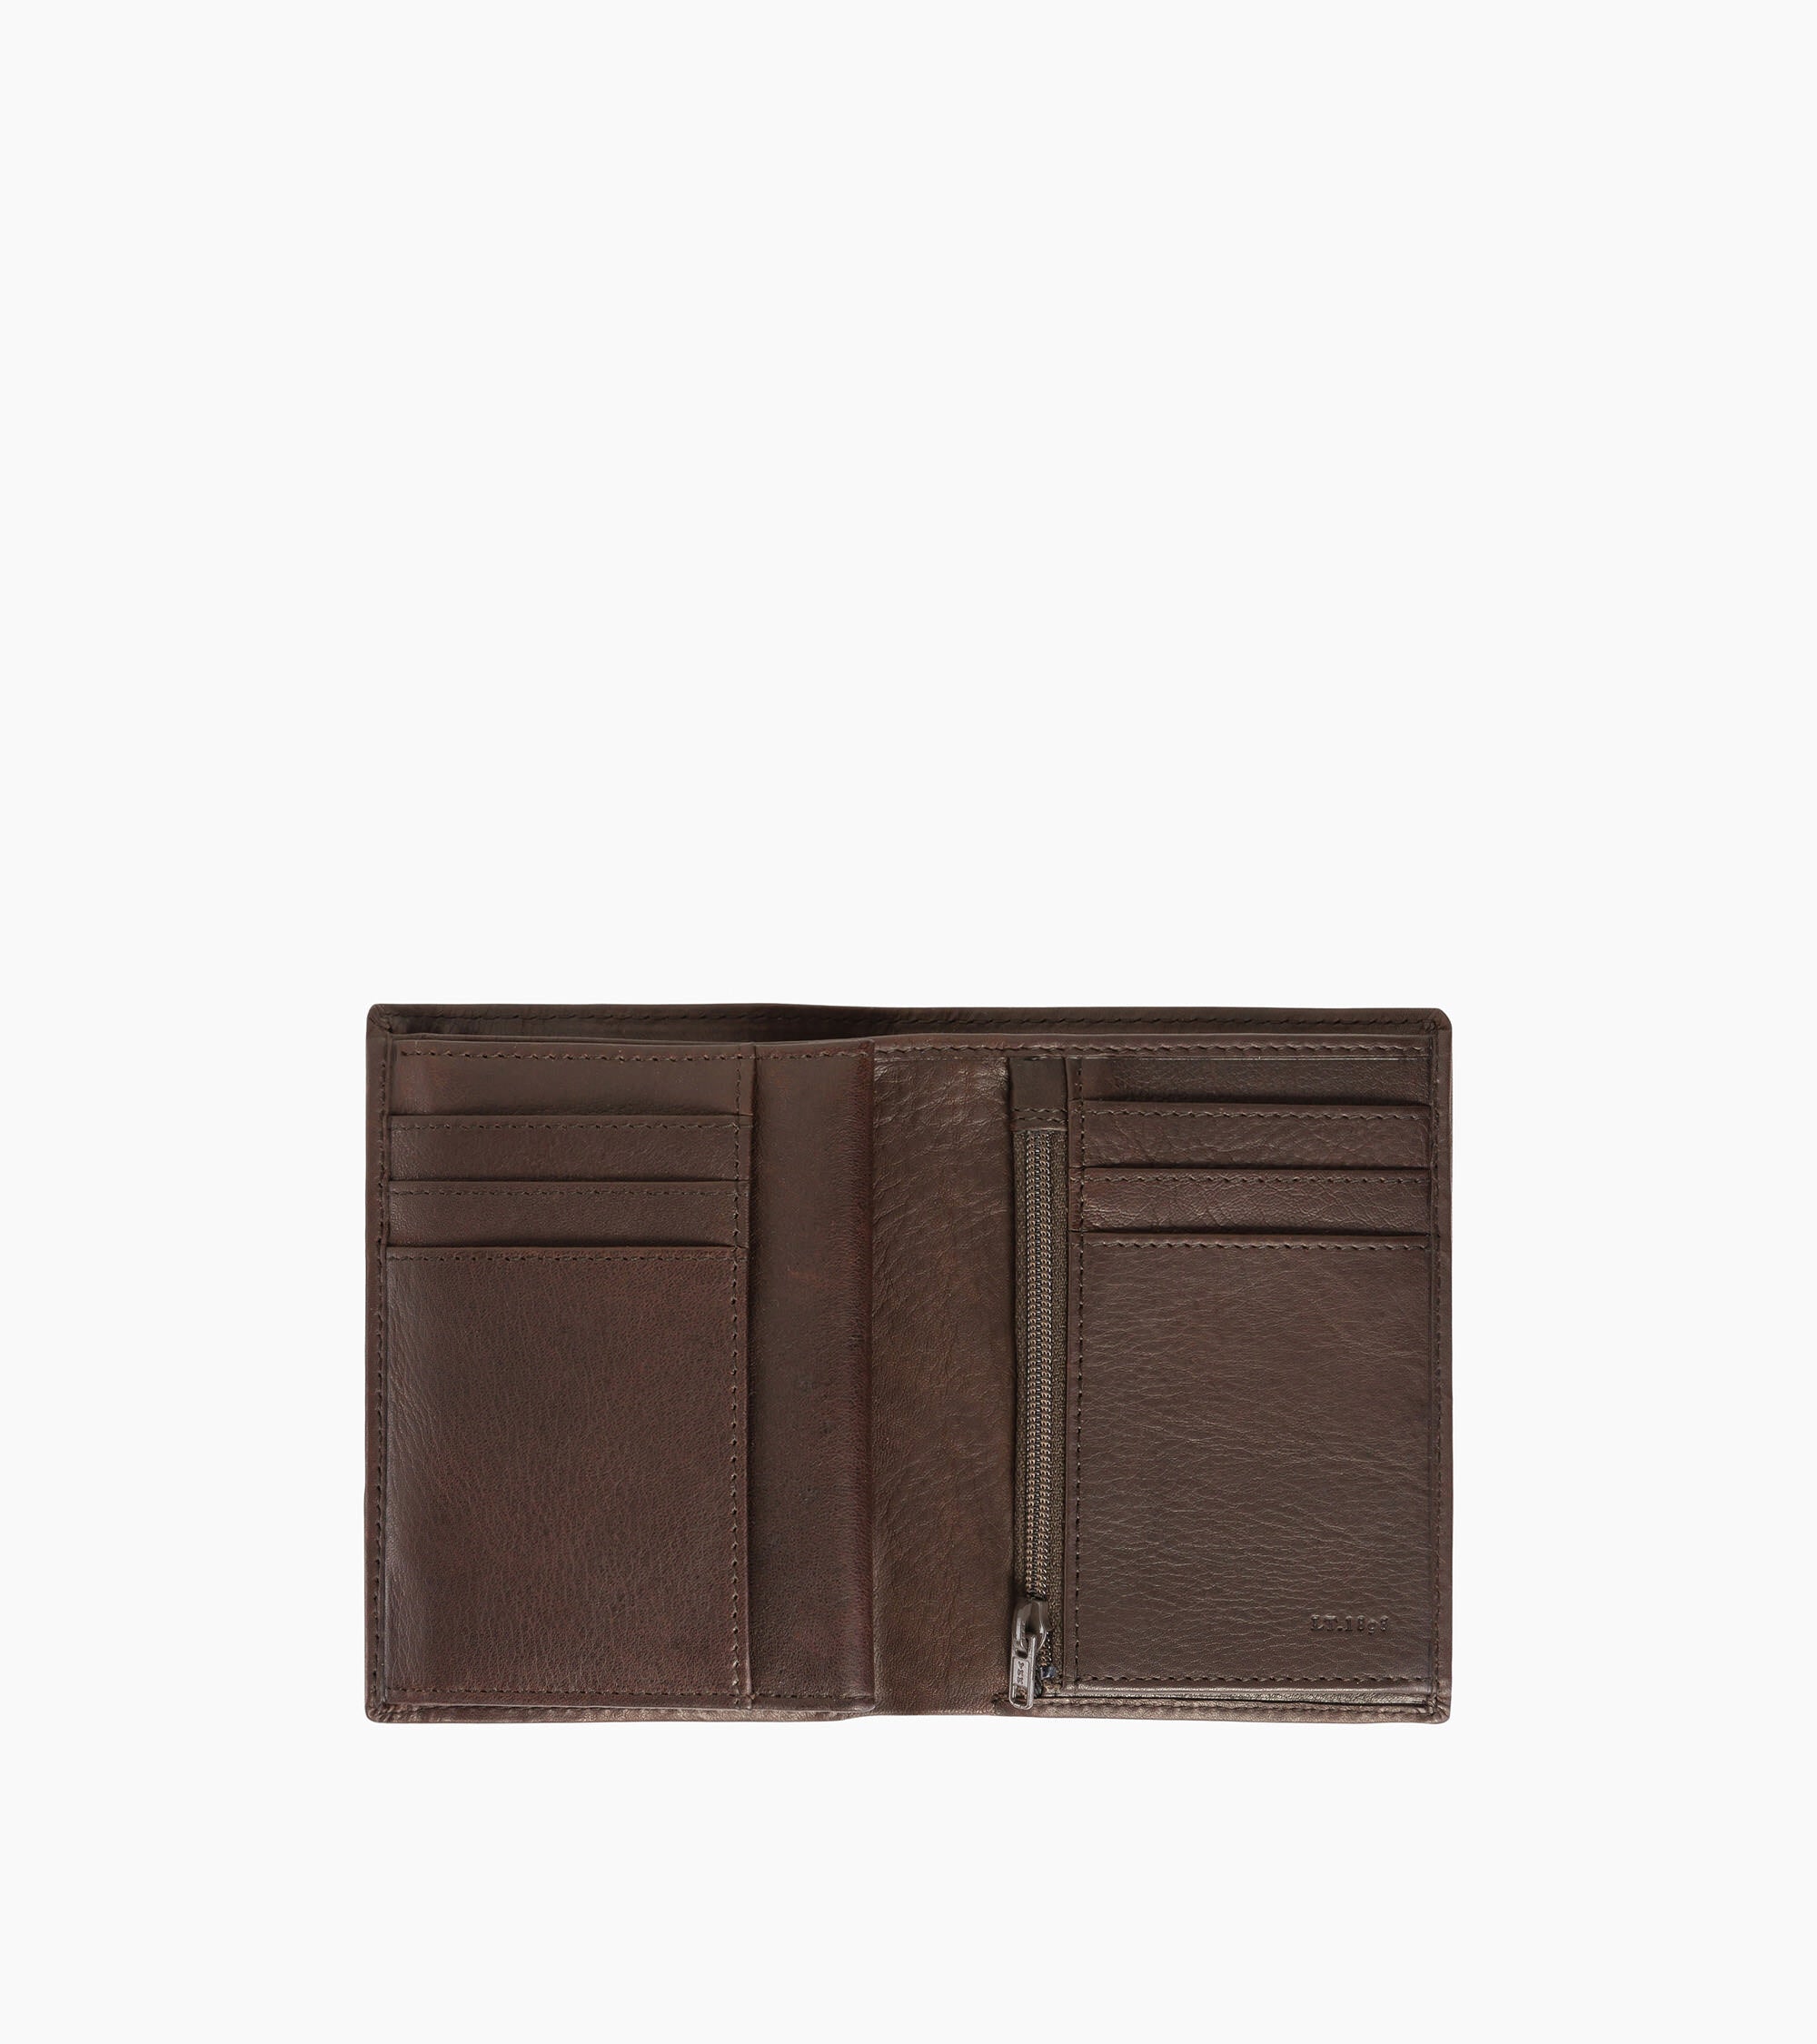 Gary vertical wallet with 3 shutters in oiled leather